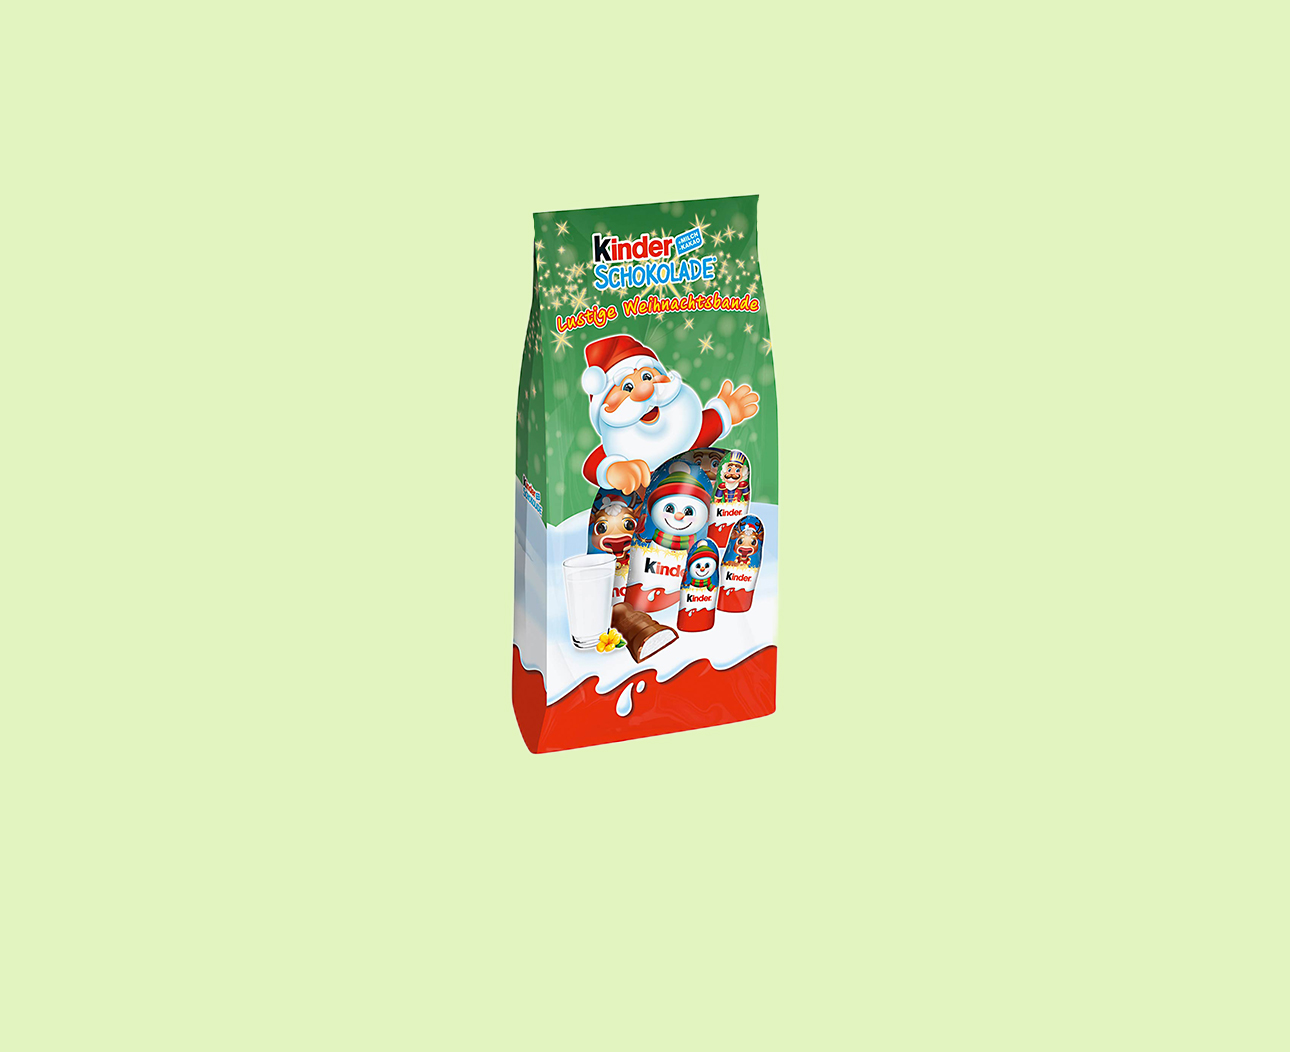 Example of Christmas packaging in Germany 